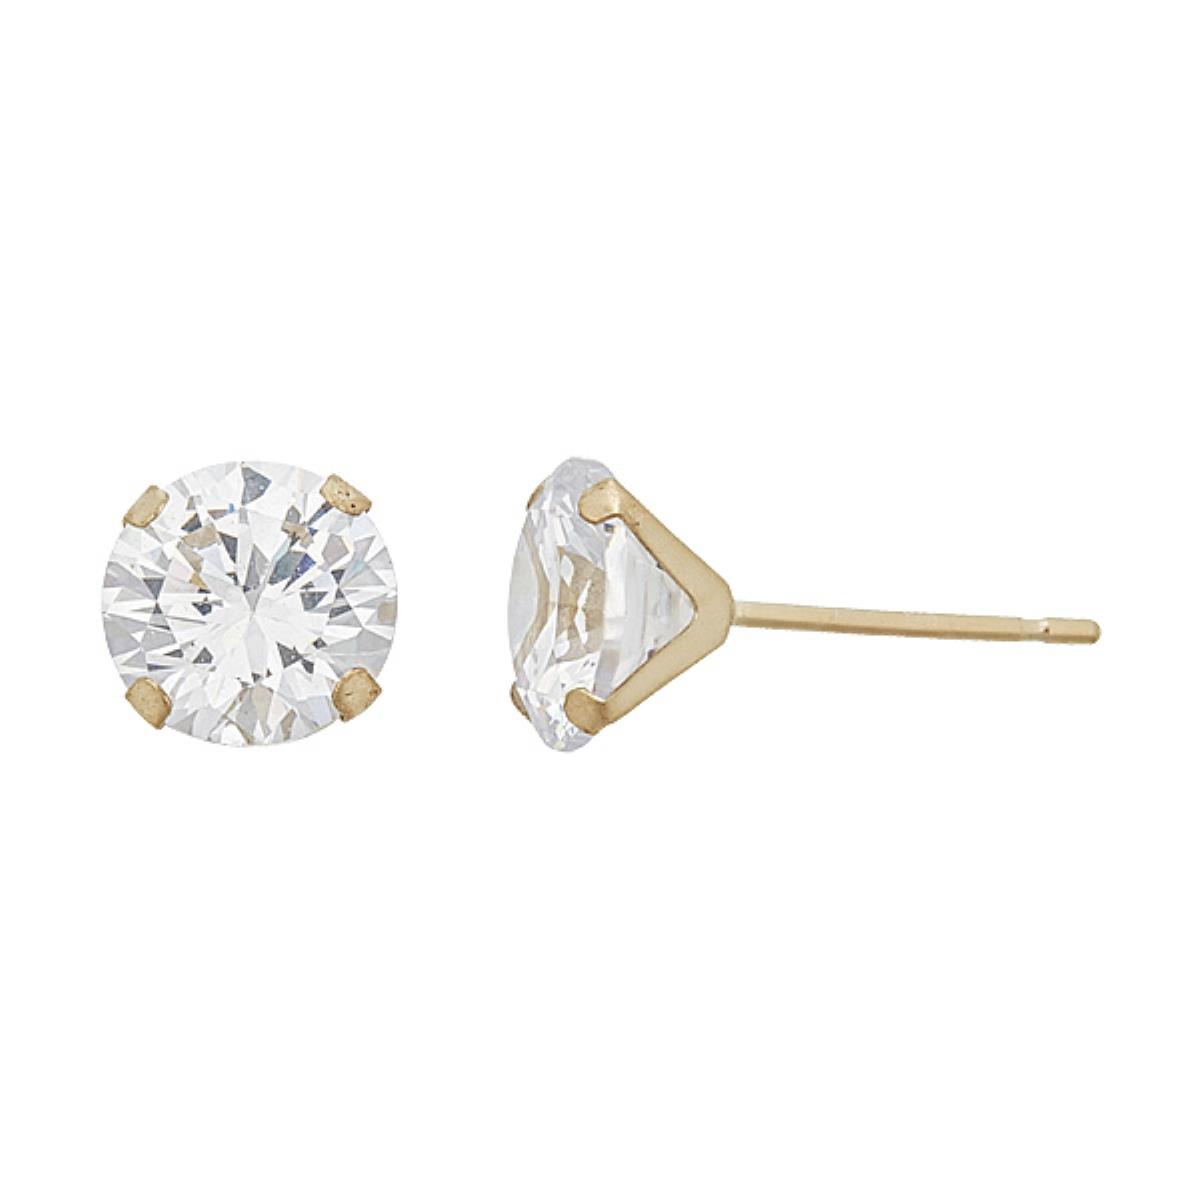 14K Yellow Gold 7mm Martini Round Cut Solitaire Stud Earring